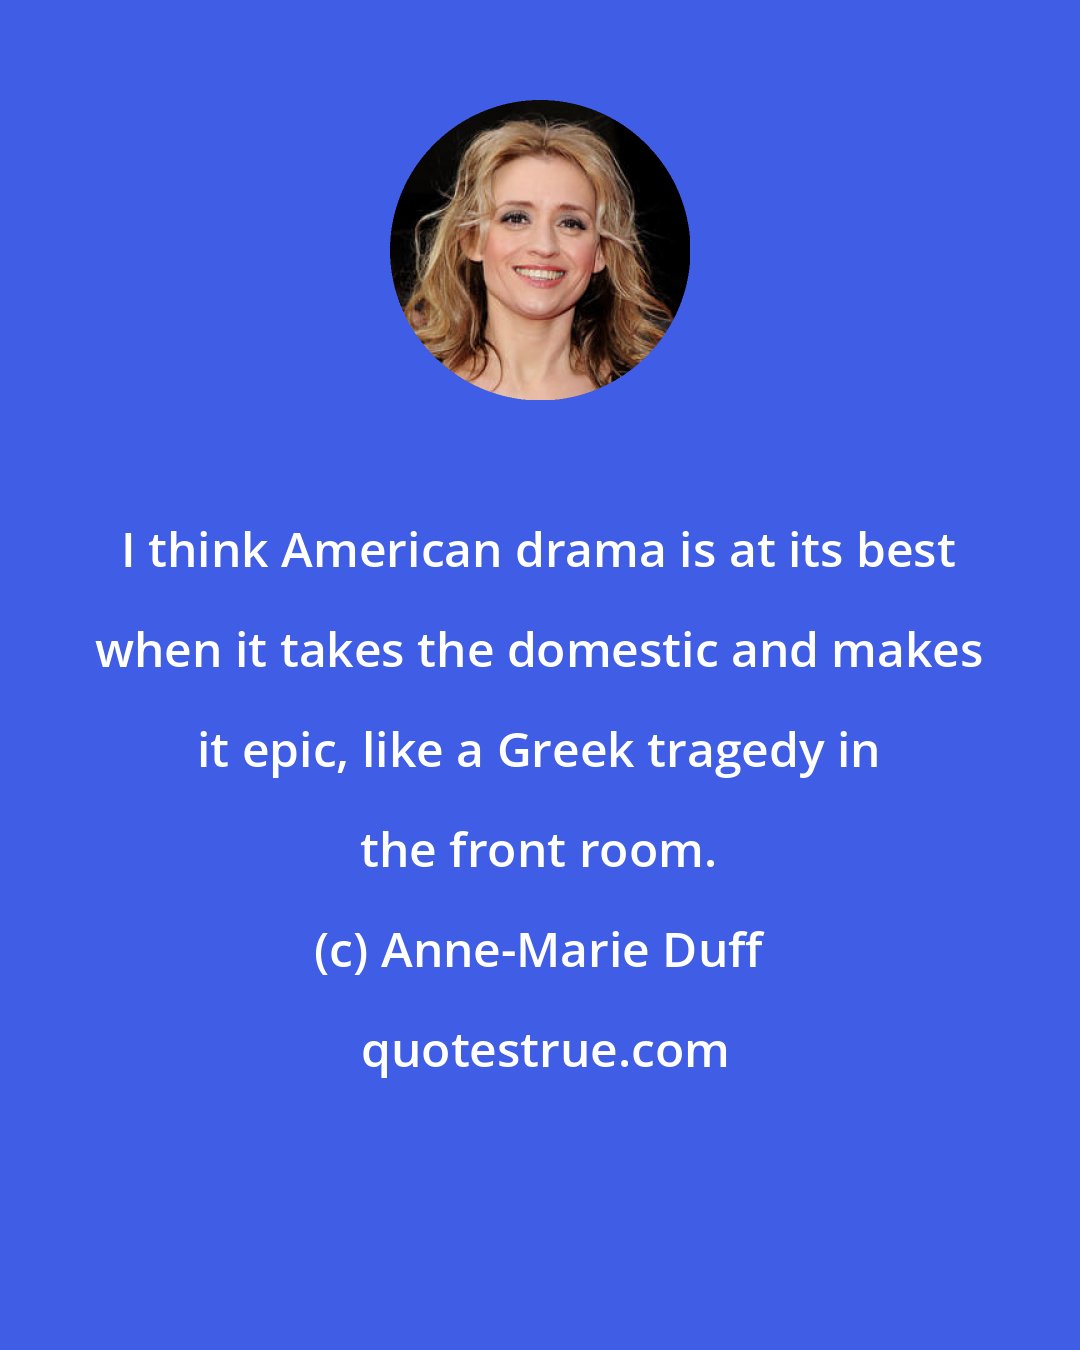 Anne-Marie Duff: I think American drama is at its best when it takes the domestic and makes it epic, like a Greek tragedy in the front room.